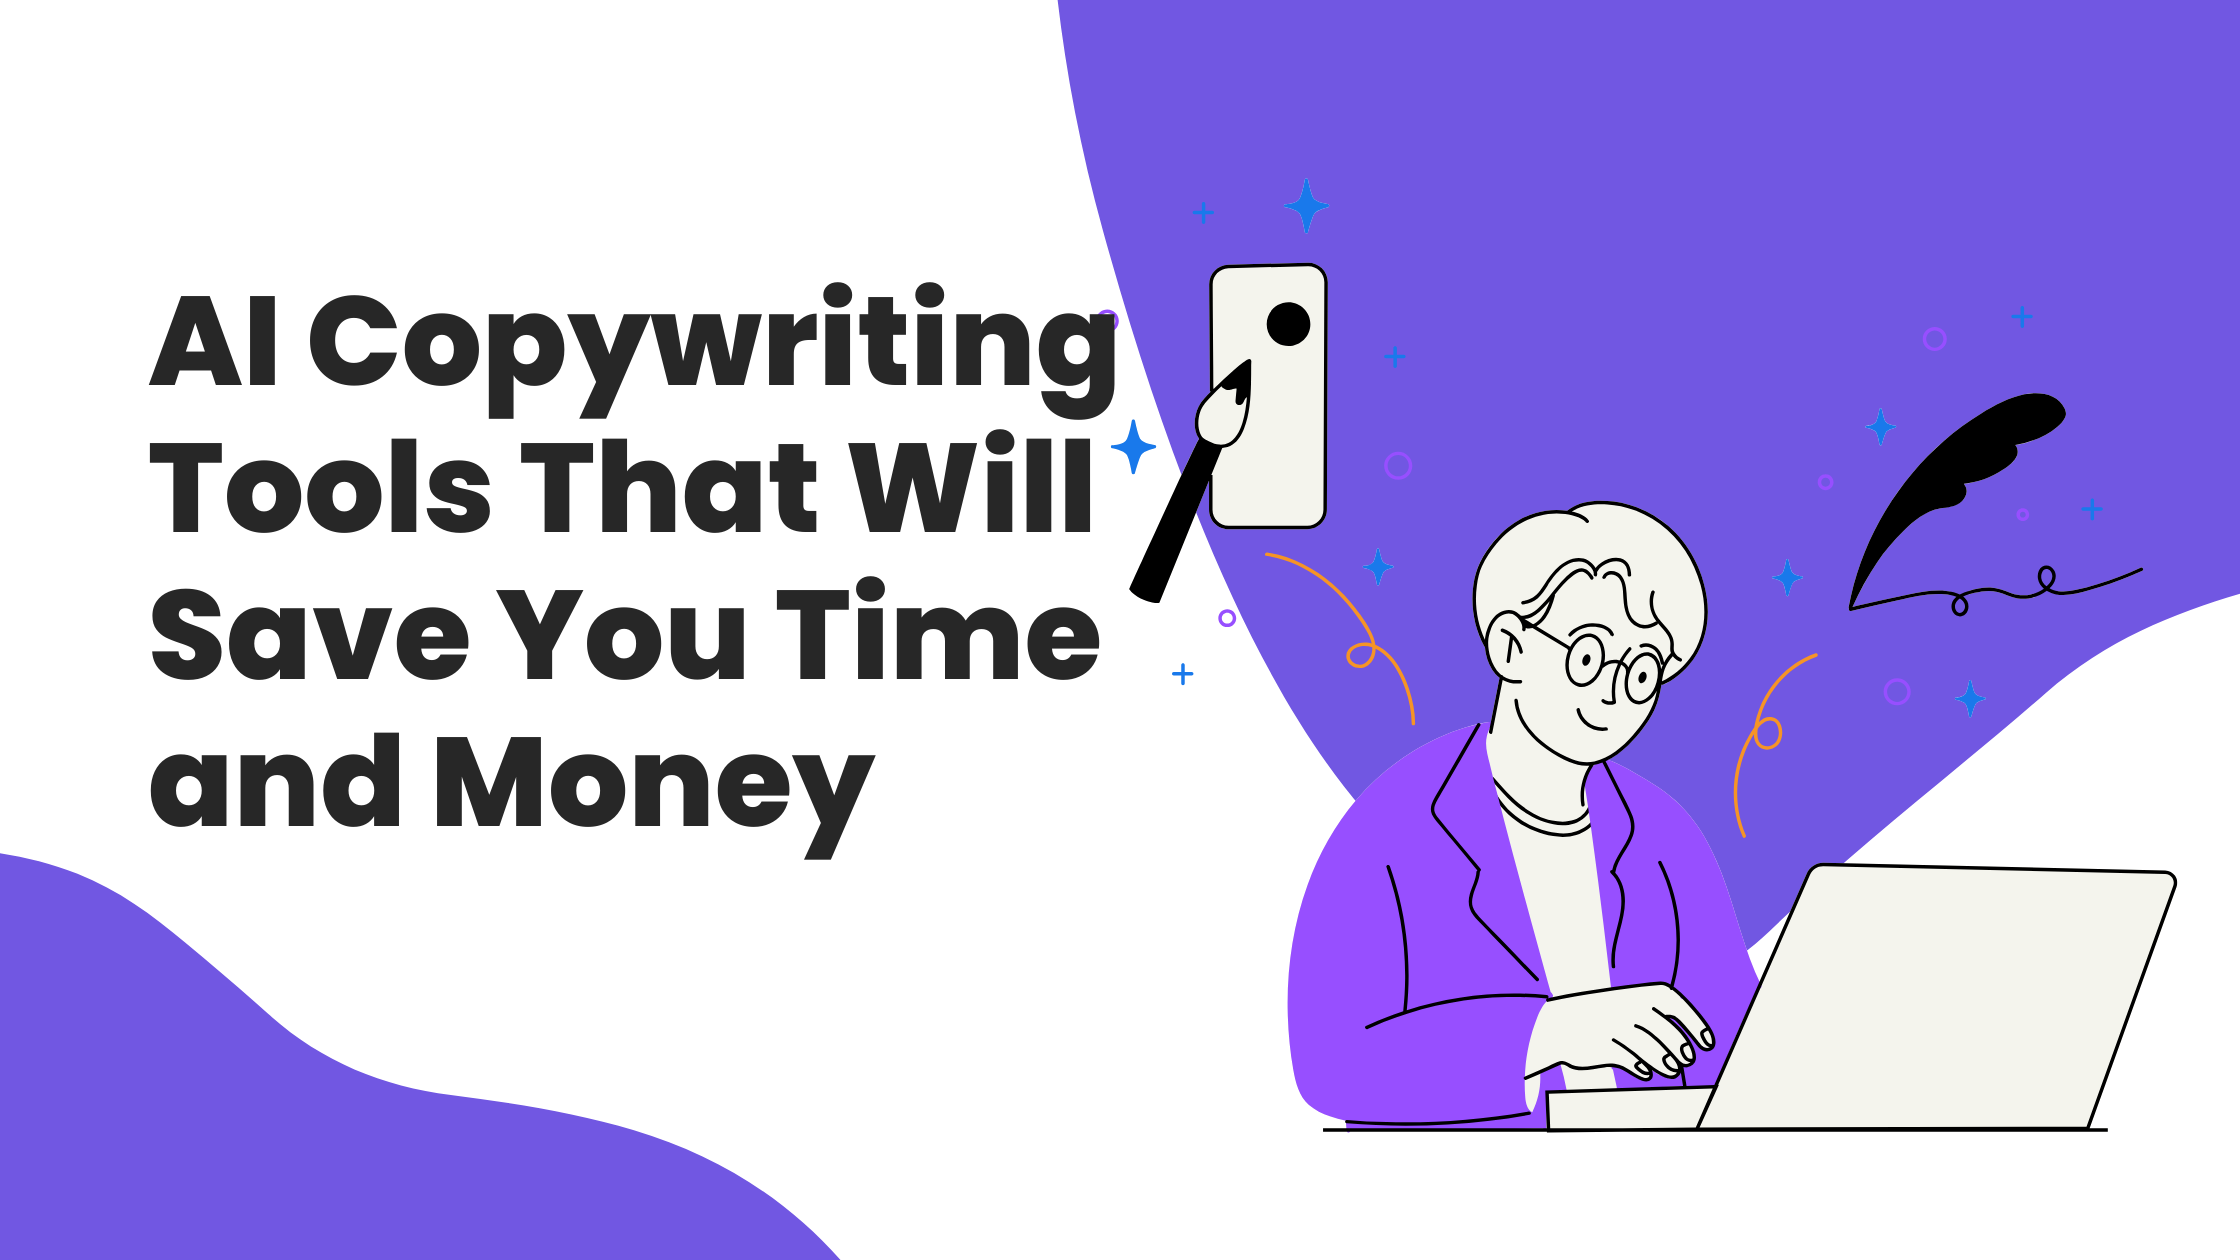 AI Copywriting Tools That Will Save You Time and Money